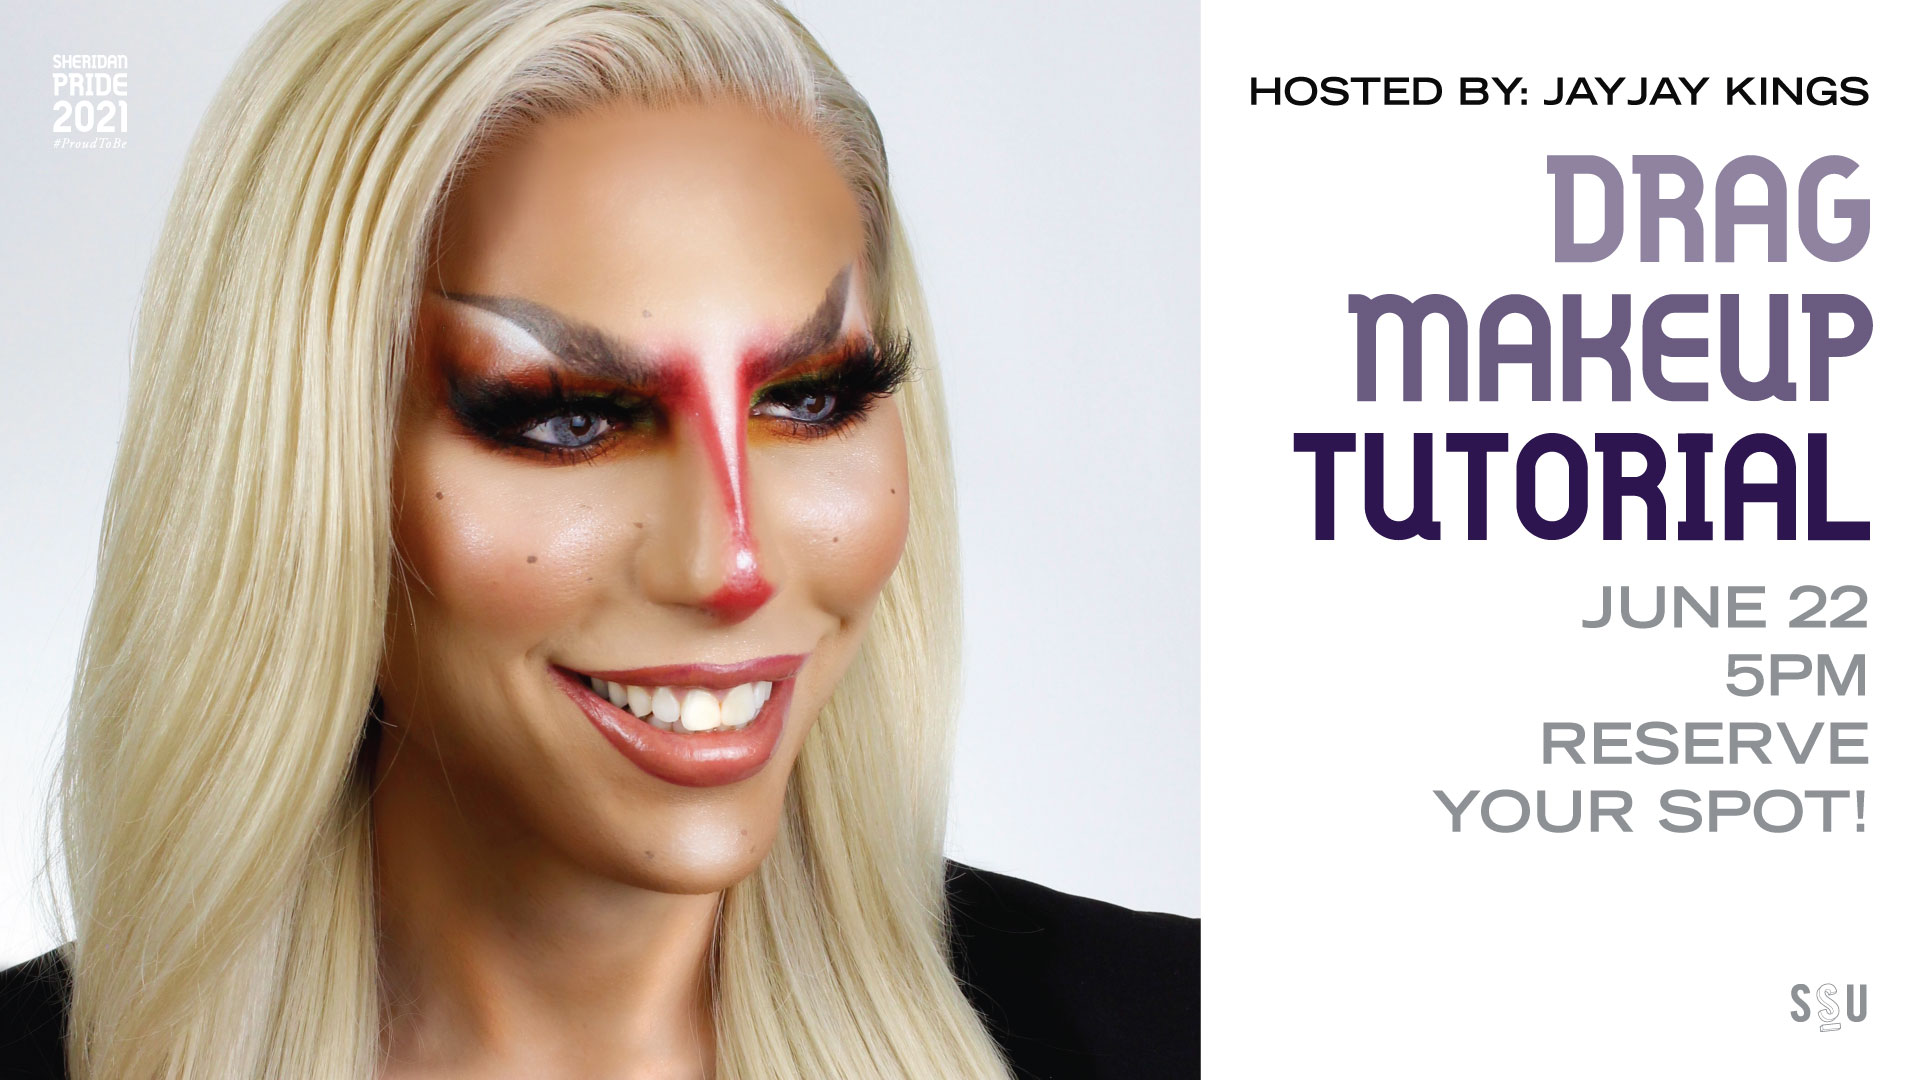 SheridanStudentUnion on Twitter: "We've got a Drag Makeup Tutorial coming your way on June 22 at 5! Grab your brushes, gloss and blush and get ready as @JayJayKings walks you through